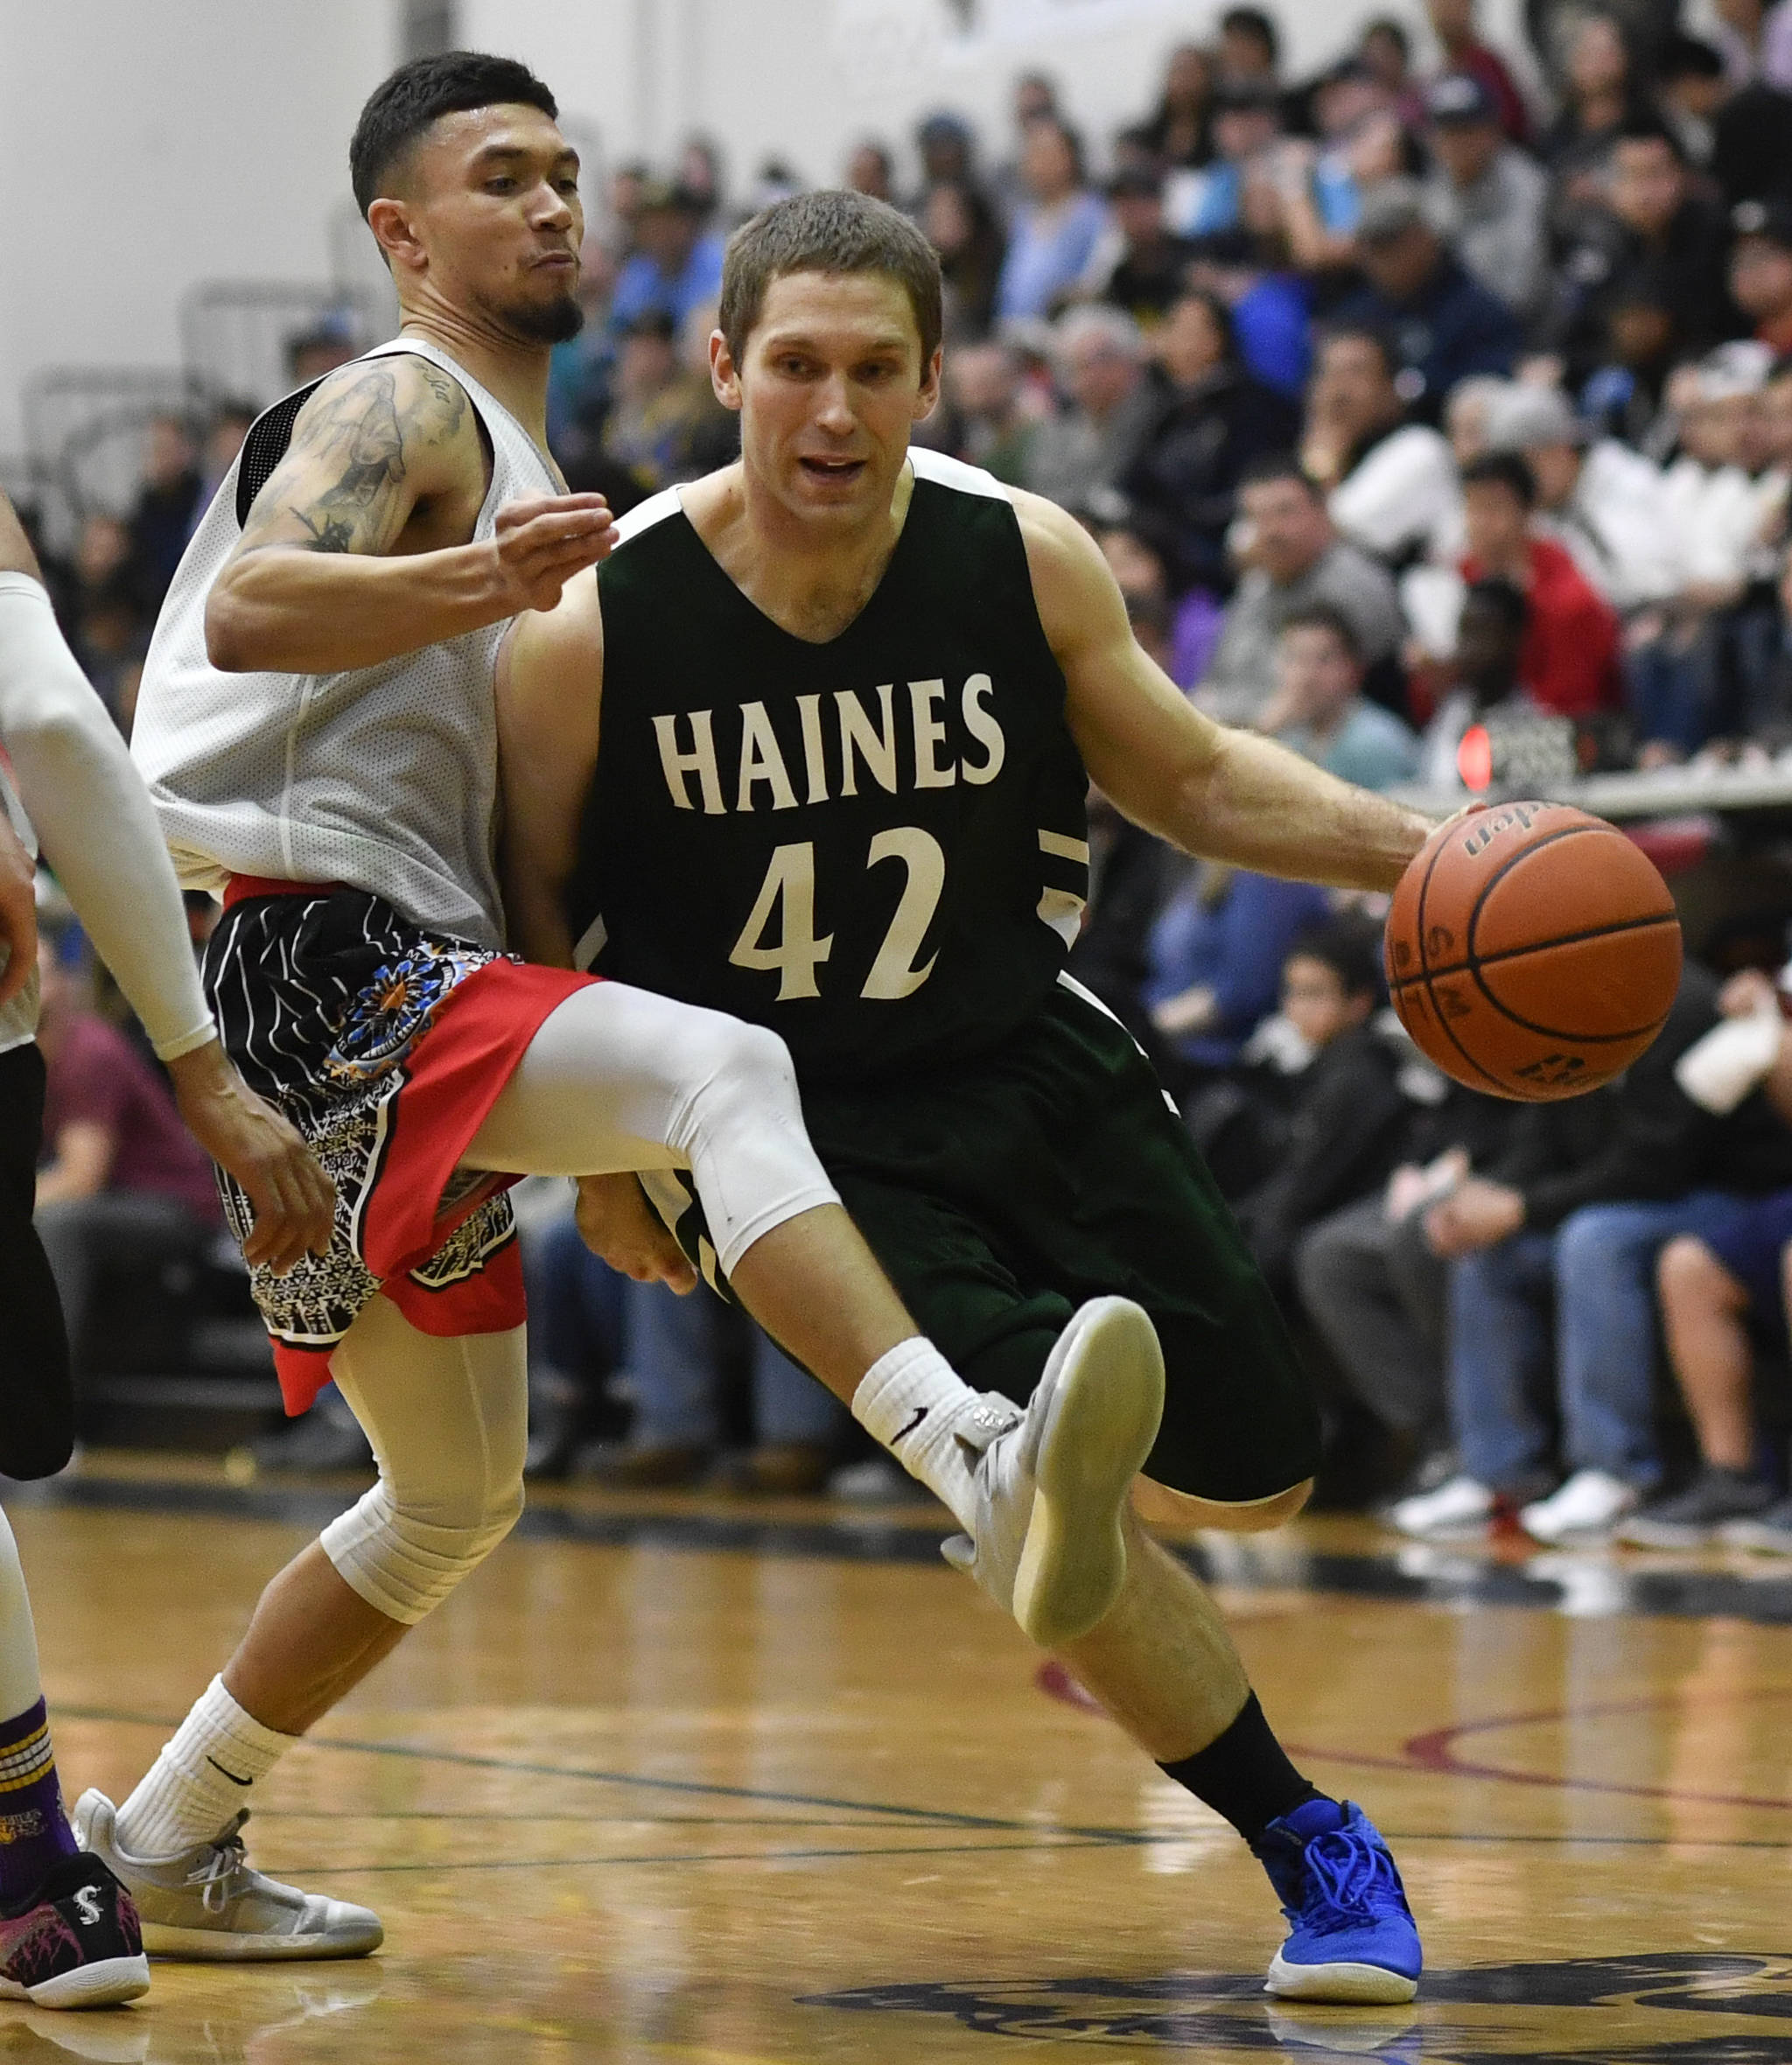 Angoon’s Aquino Brinson attempts to stay in front of Haines’ Kyle Fossman in the B final at the Gold Medal Basketball Tournament on Saturday, March 23, 2019. Haines won 88-80. (Michael Penn | Juneau Empire)